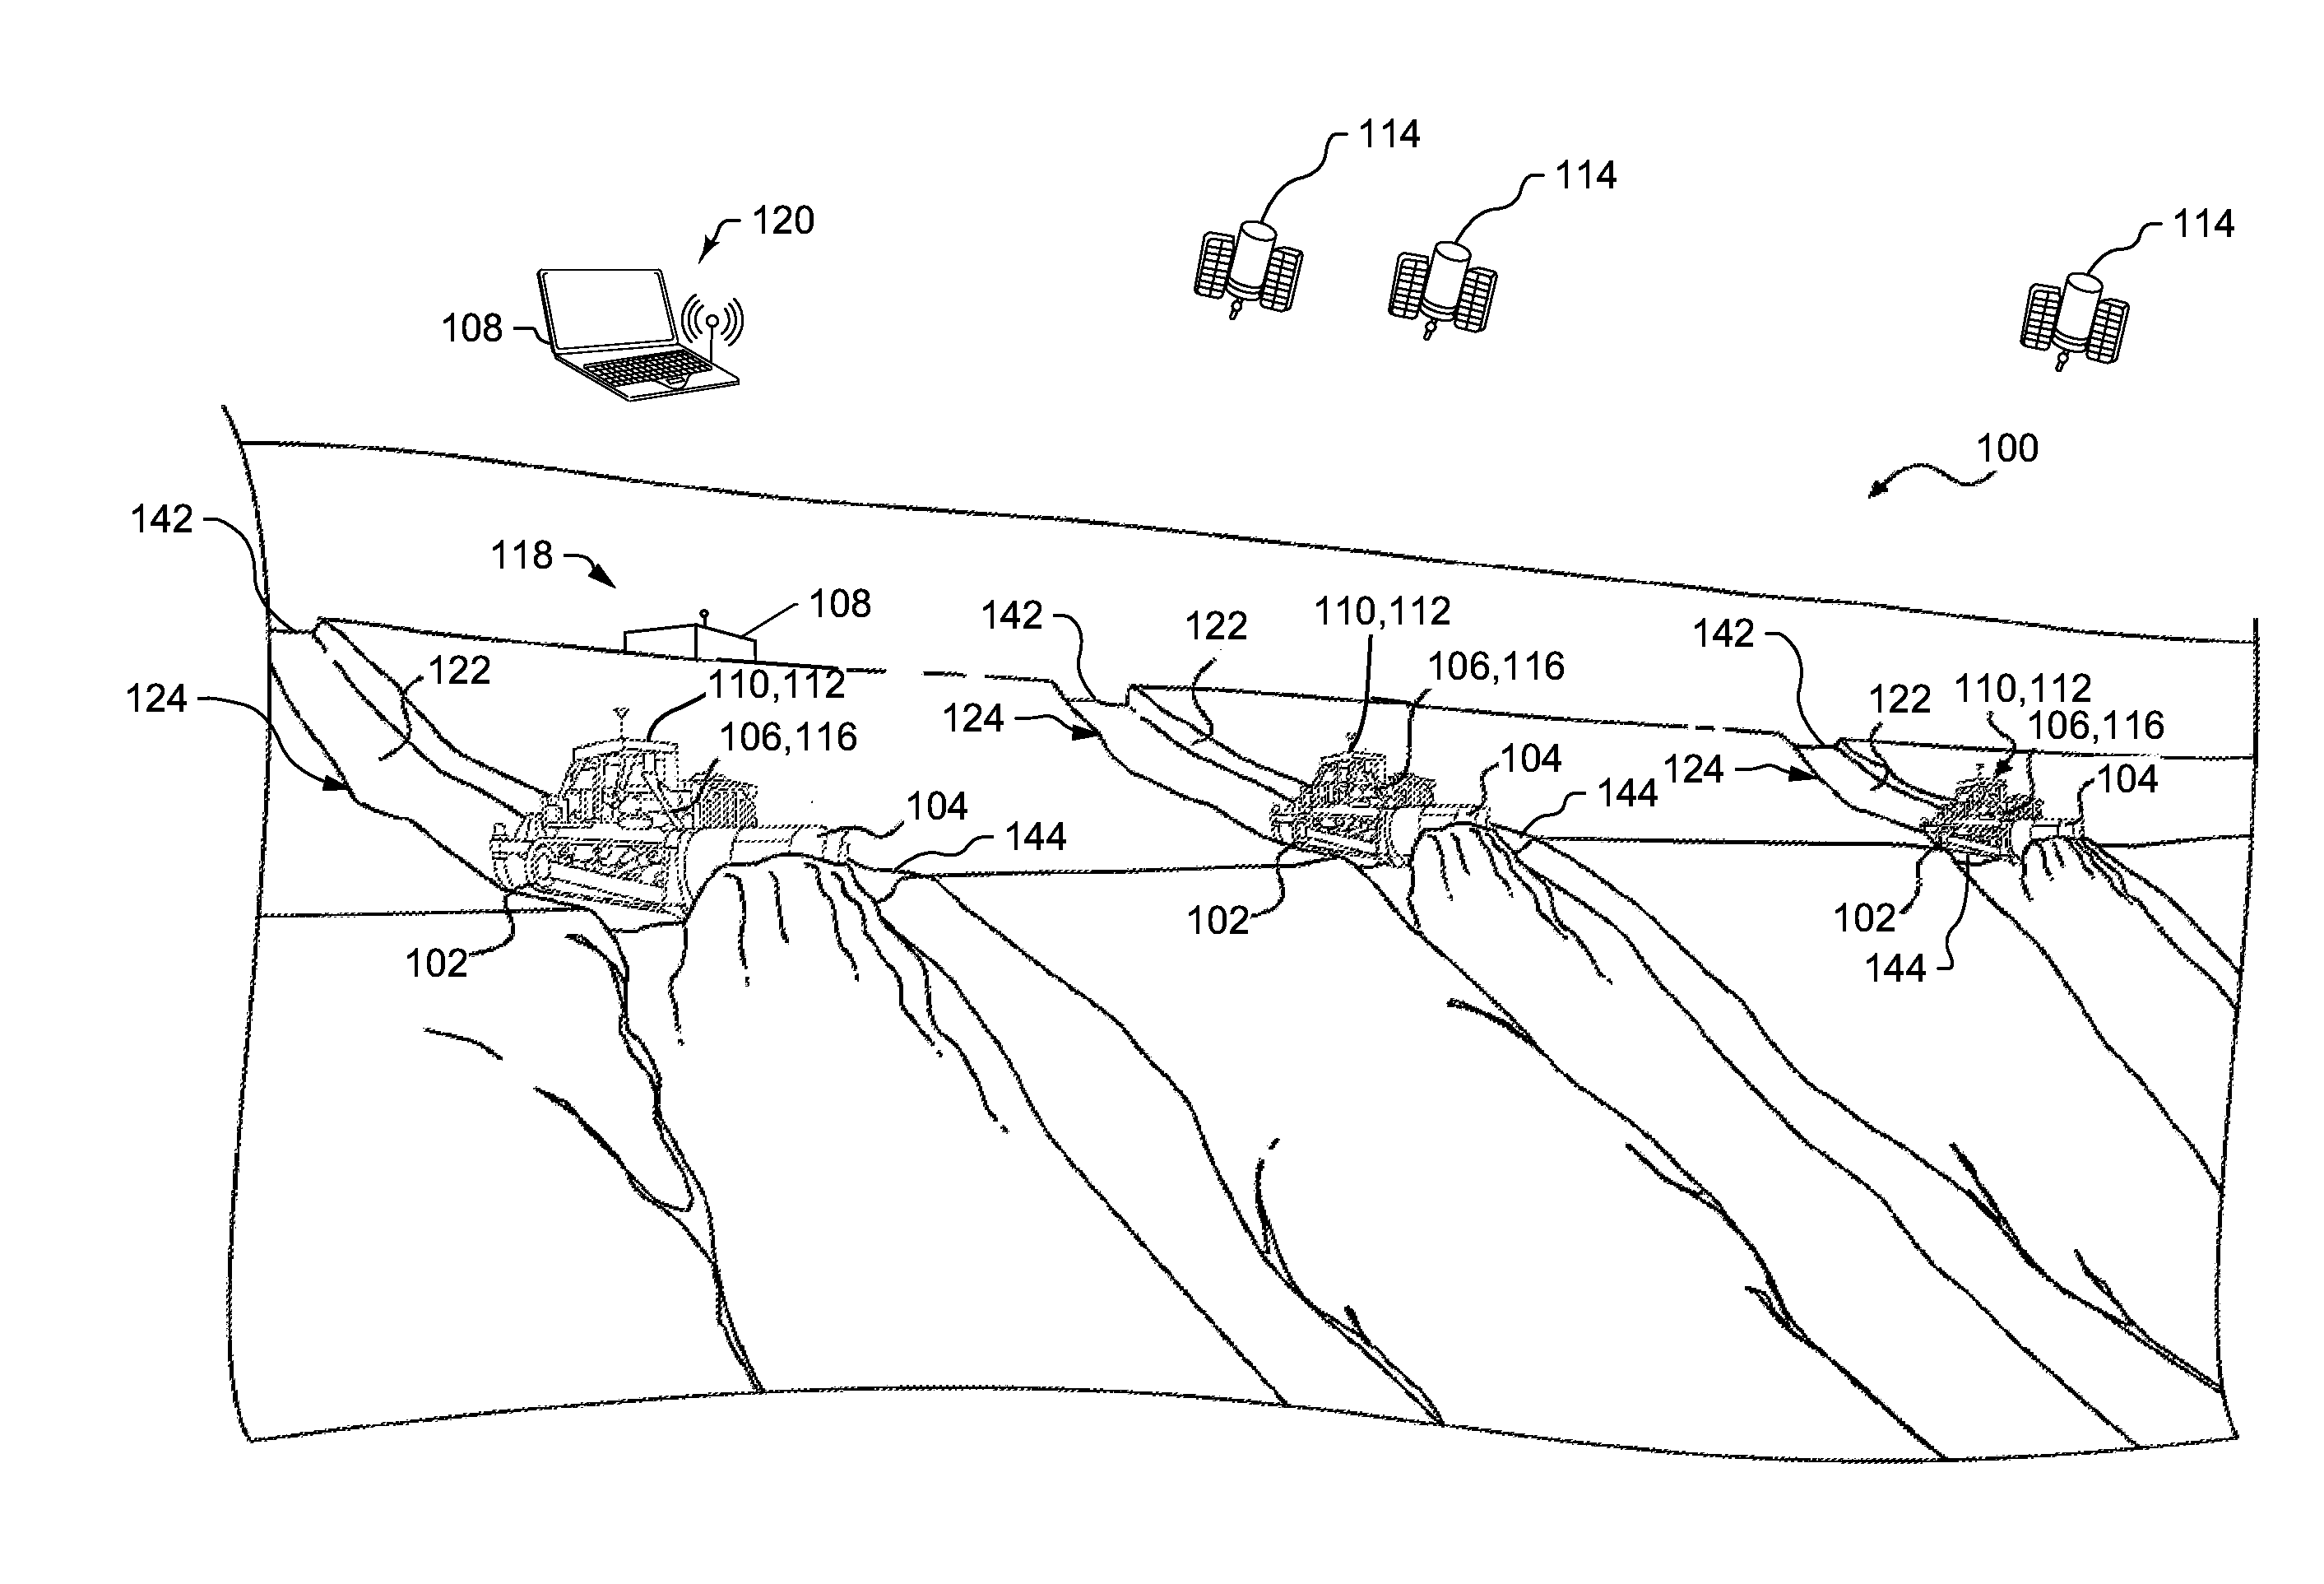 Systems and Methods for Constrained Dozing